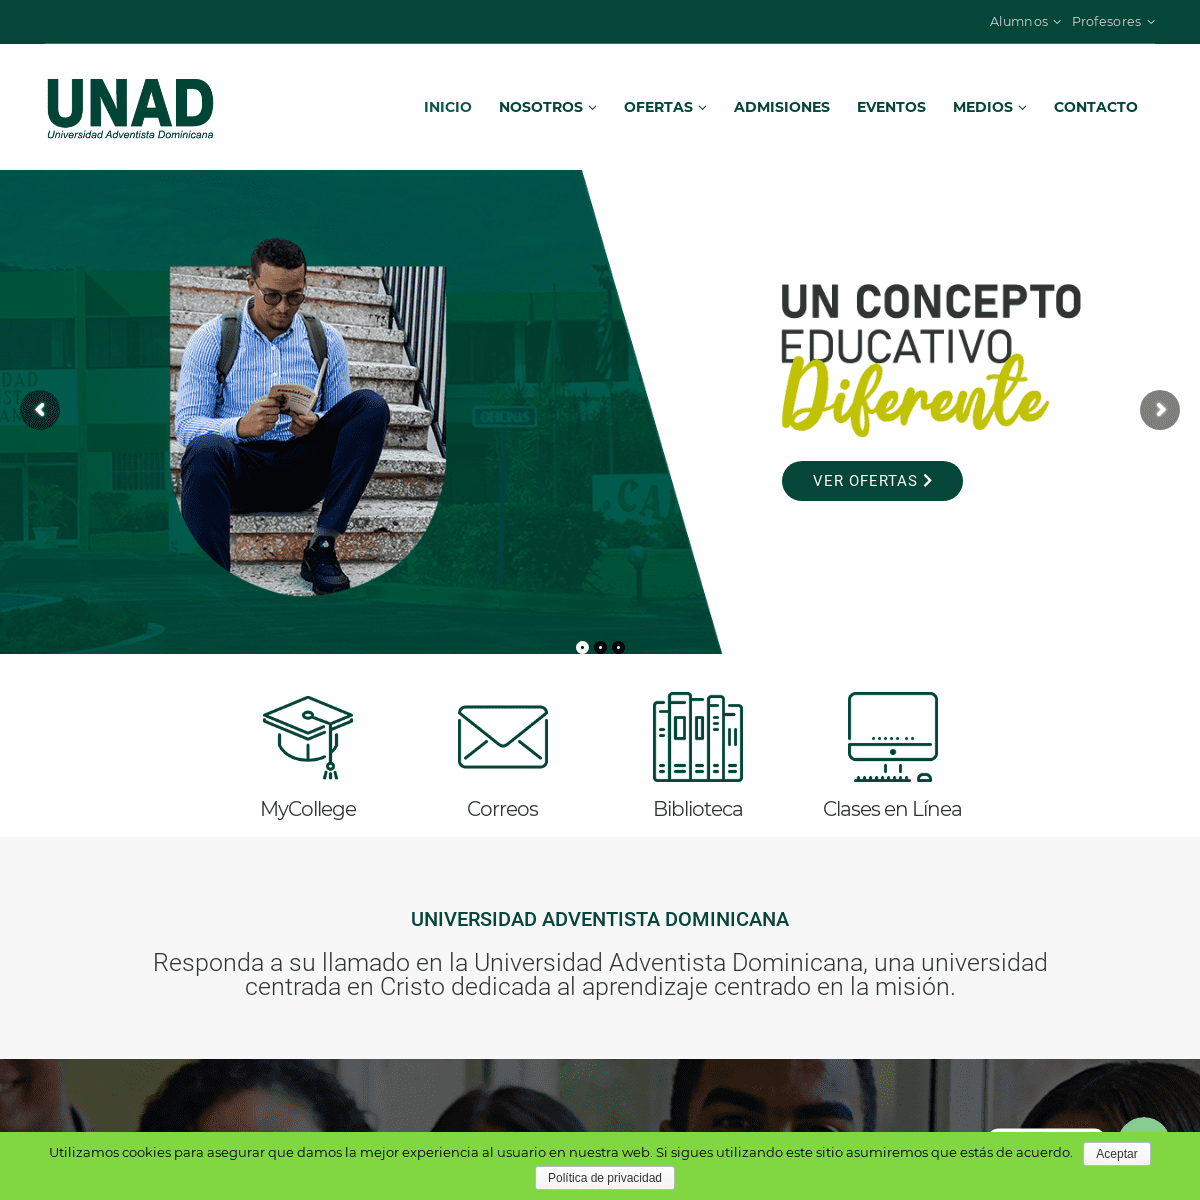 A complete backup of unad.edu.do